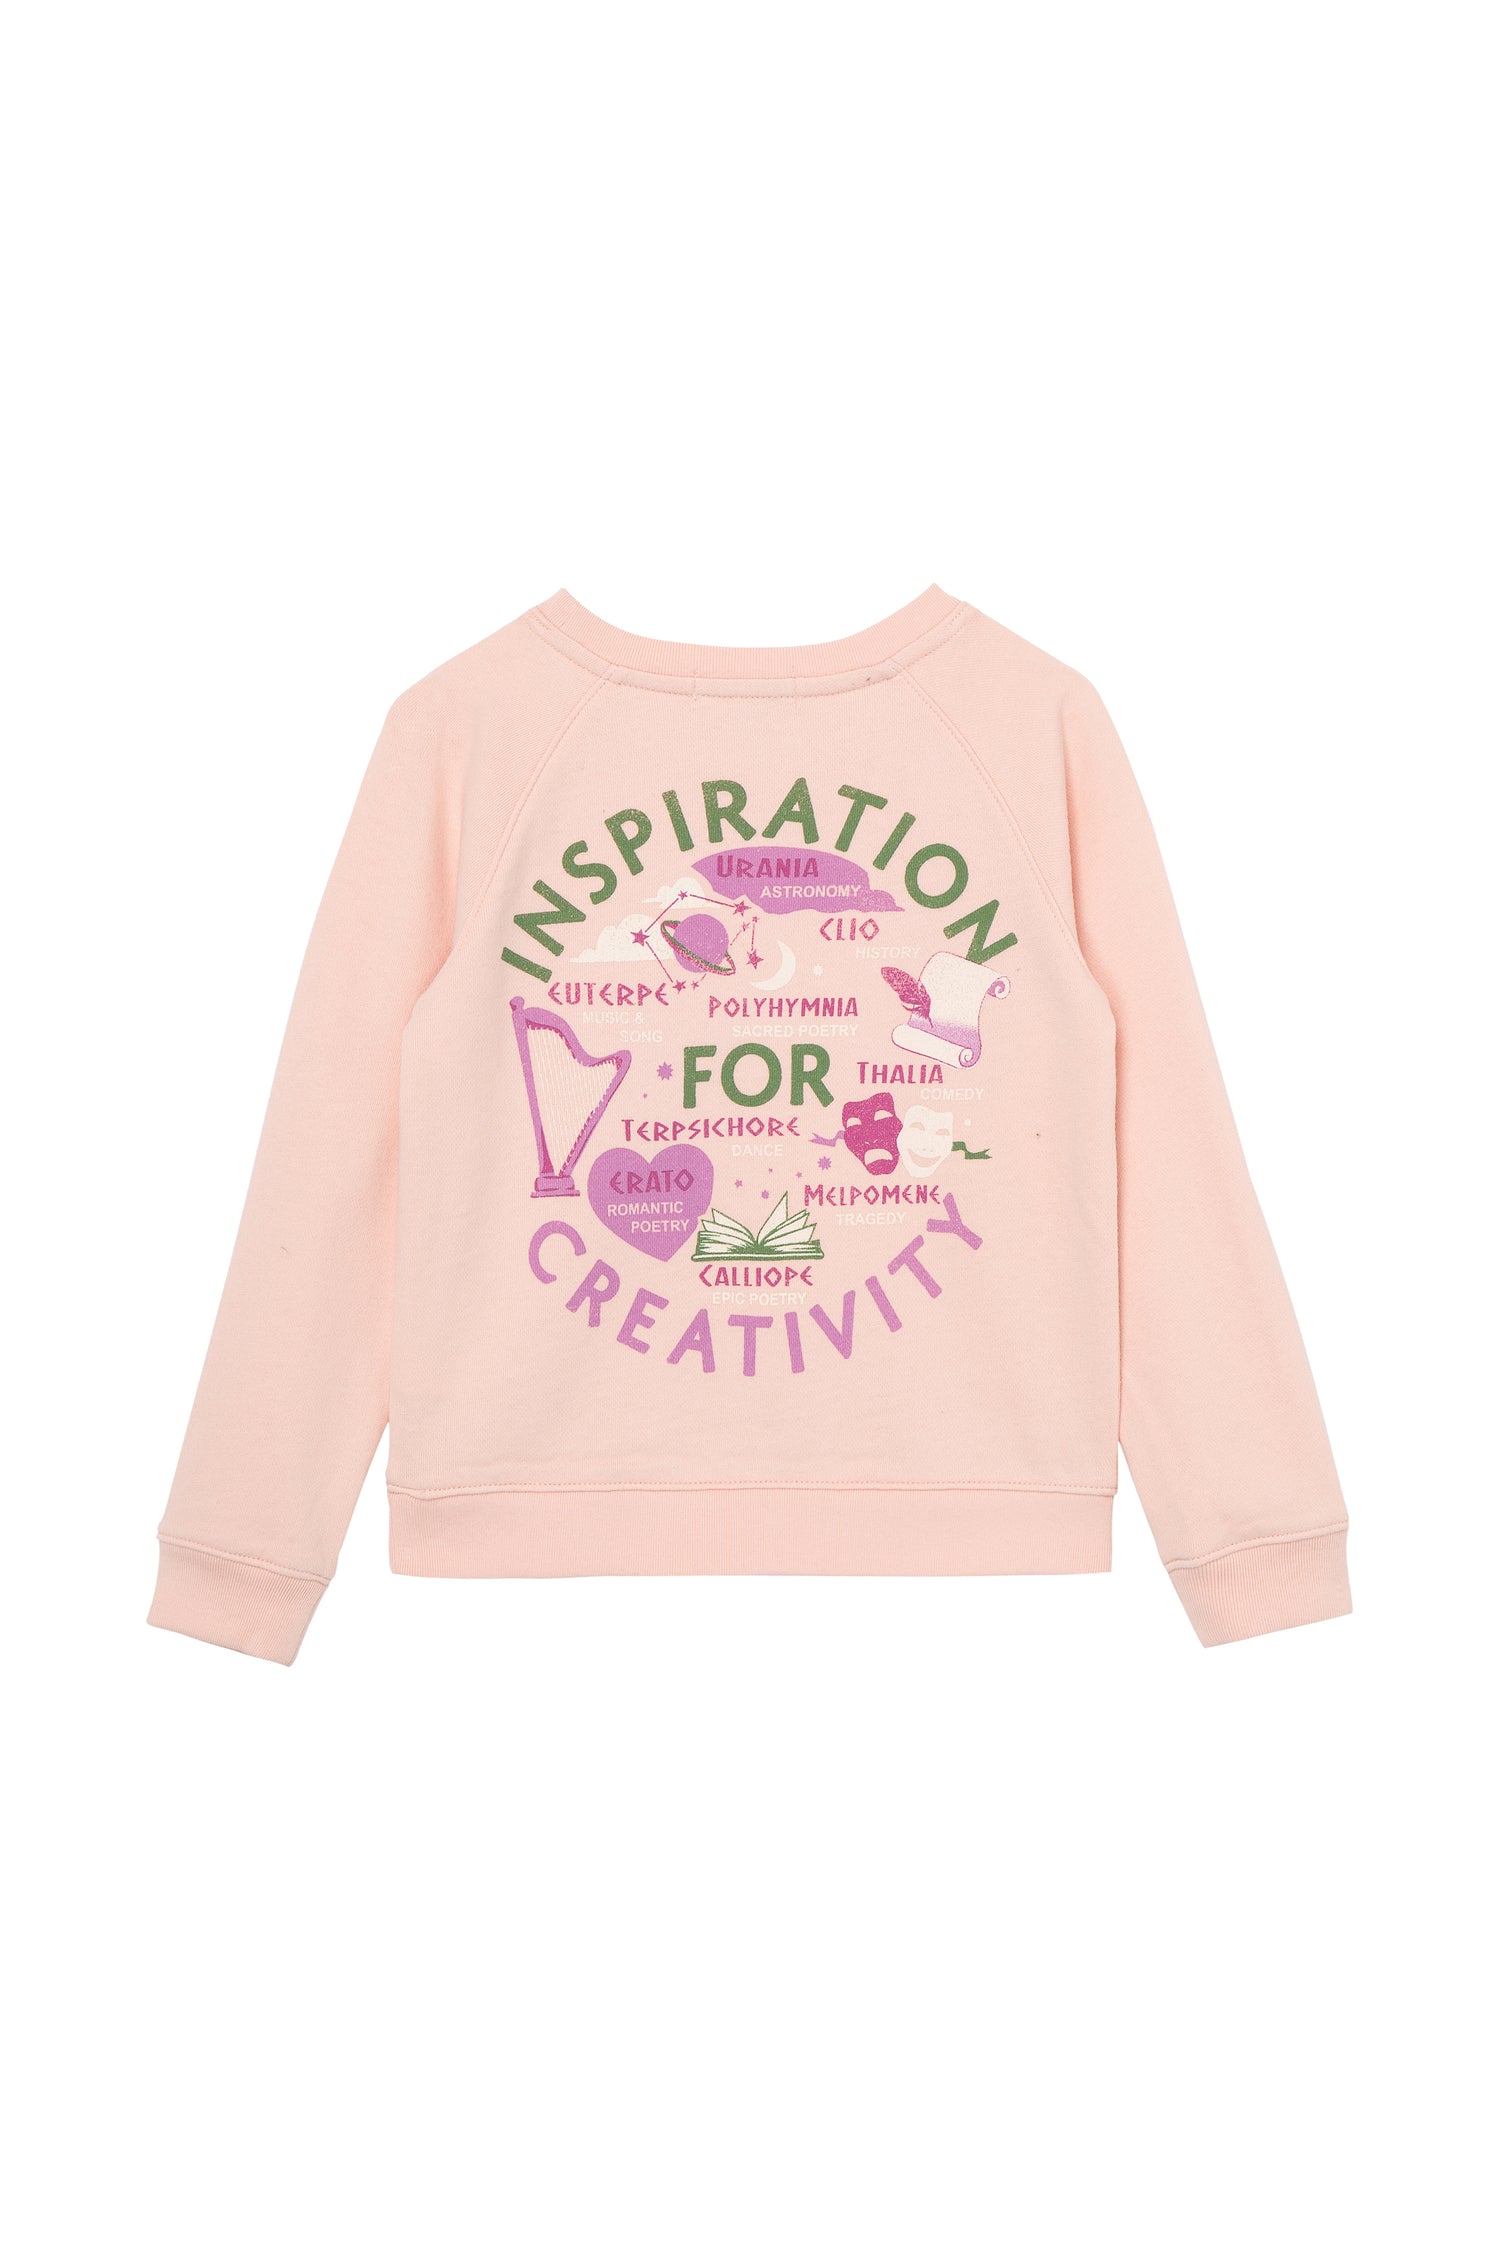 Back of pink sweatshirt with different Greek goddesses, symbols and test 'Inspiration for Creativity'